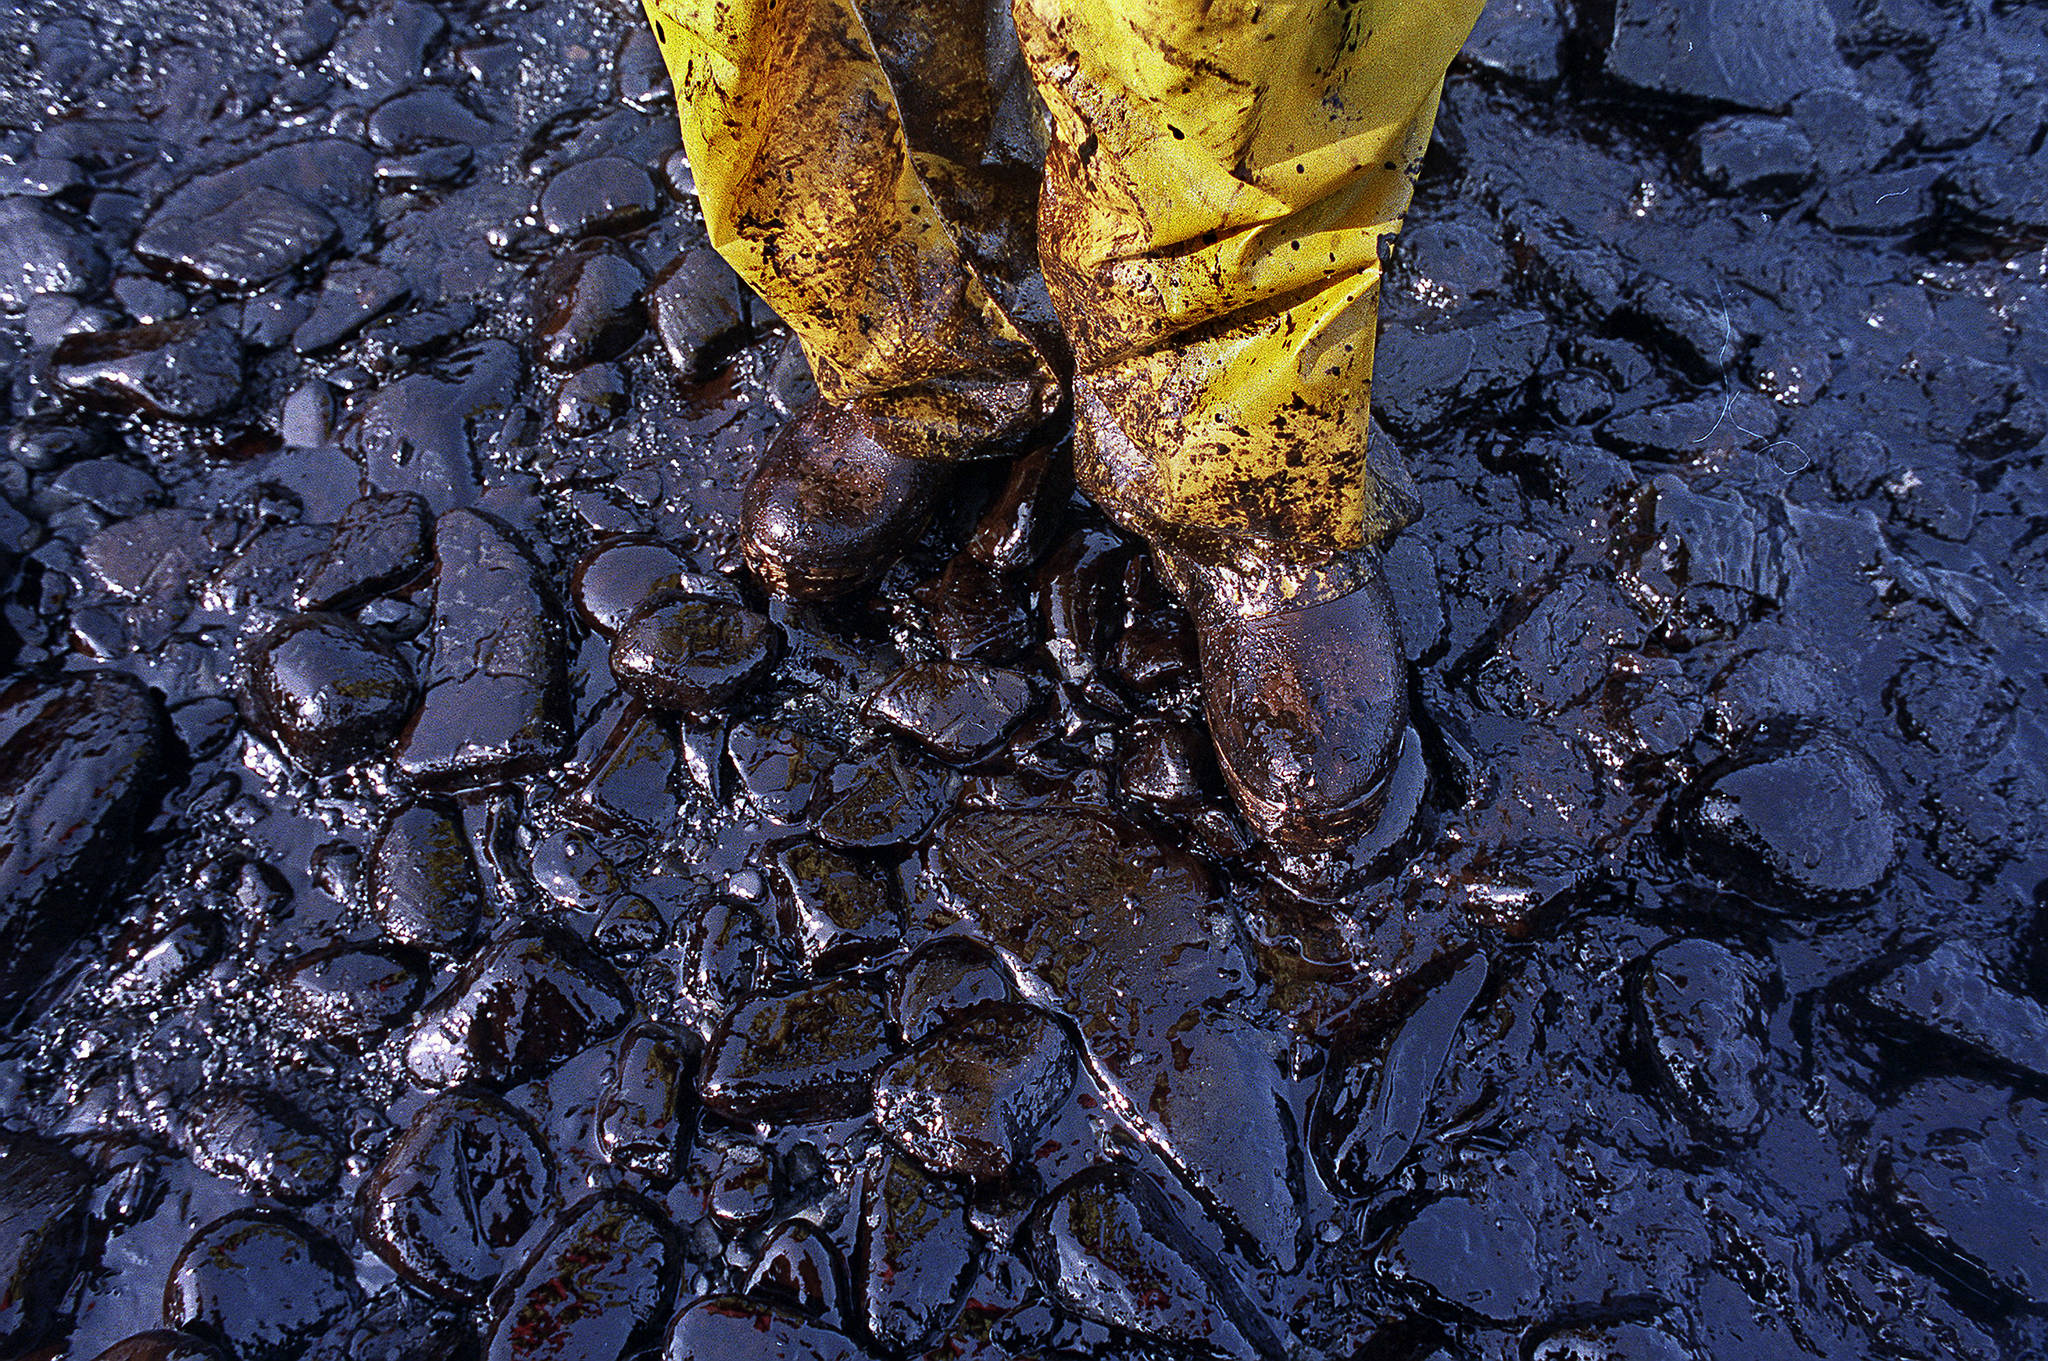 The Exxon Valdez oil tanker spill March 24, 1989, blackened hundreds of miles of coastline in Alaska’s Prince William Sound, devasting wildlife and altering lives in fishing communities for generations. (John Gaps III / Associated Press)